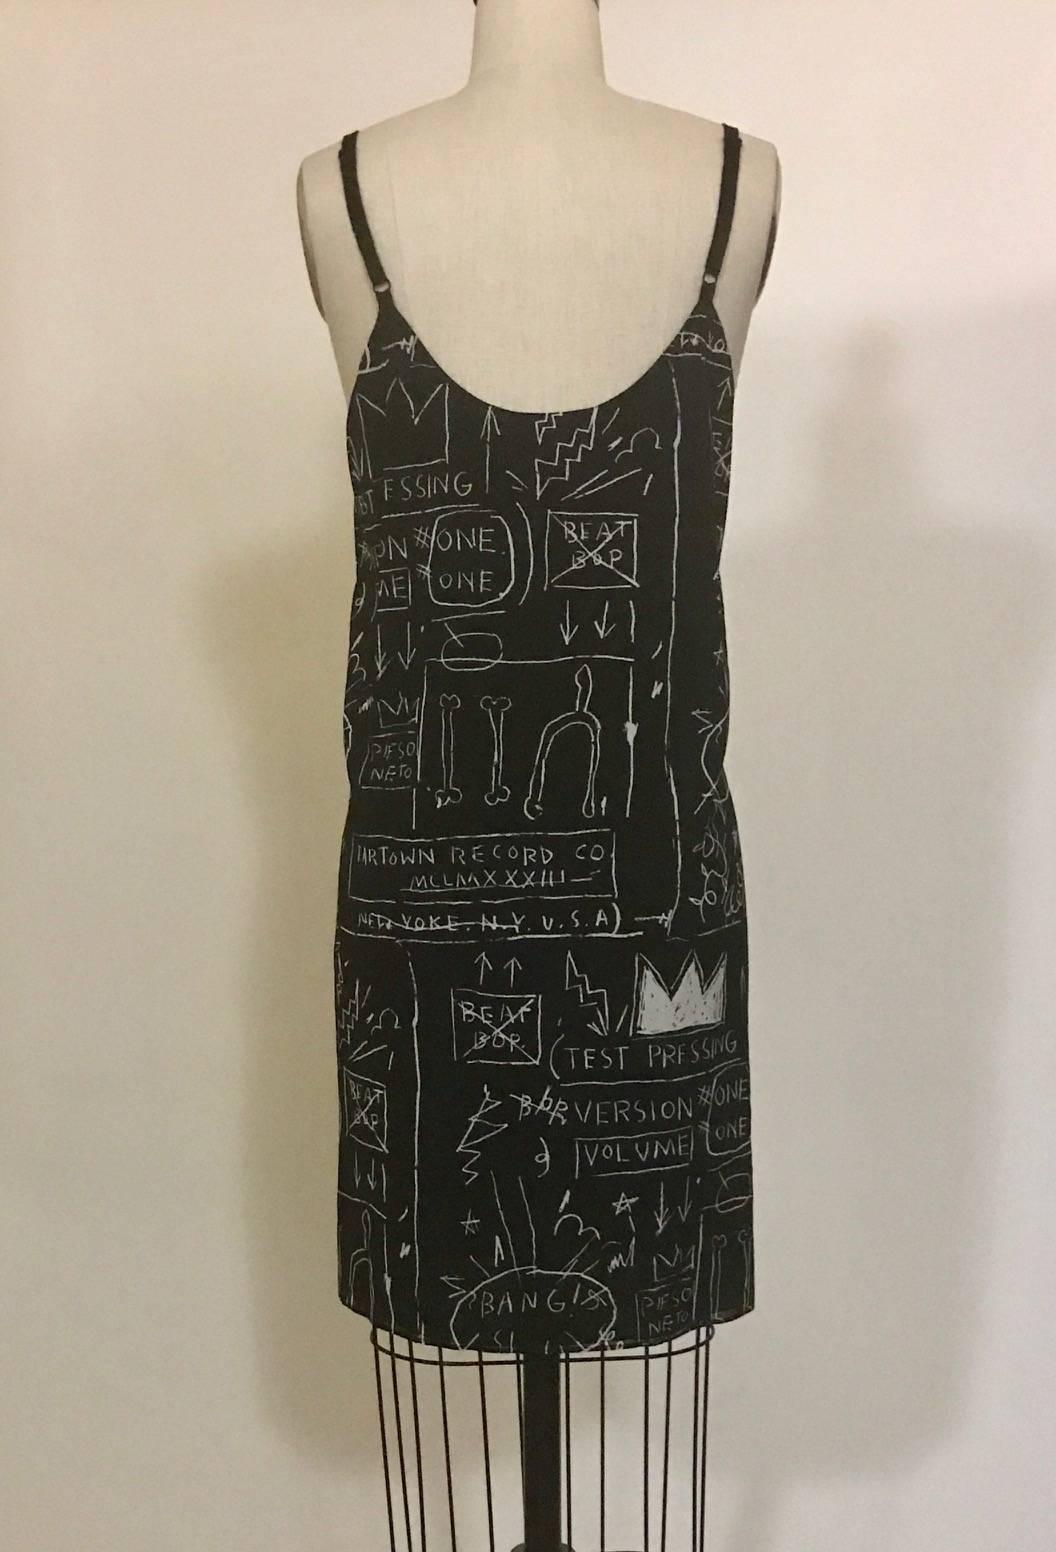 Alice & Olivia black and white graffiti print slip dress from their limited edition Jean Michel Basquiat collection. Pulls on. adjustable shoulder straps.

94% silk, 6% elastane.
Fully lined in 94% polyester, 6% elastane. 

Size L.
Bust 38